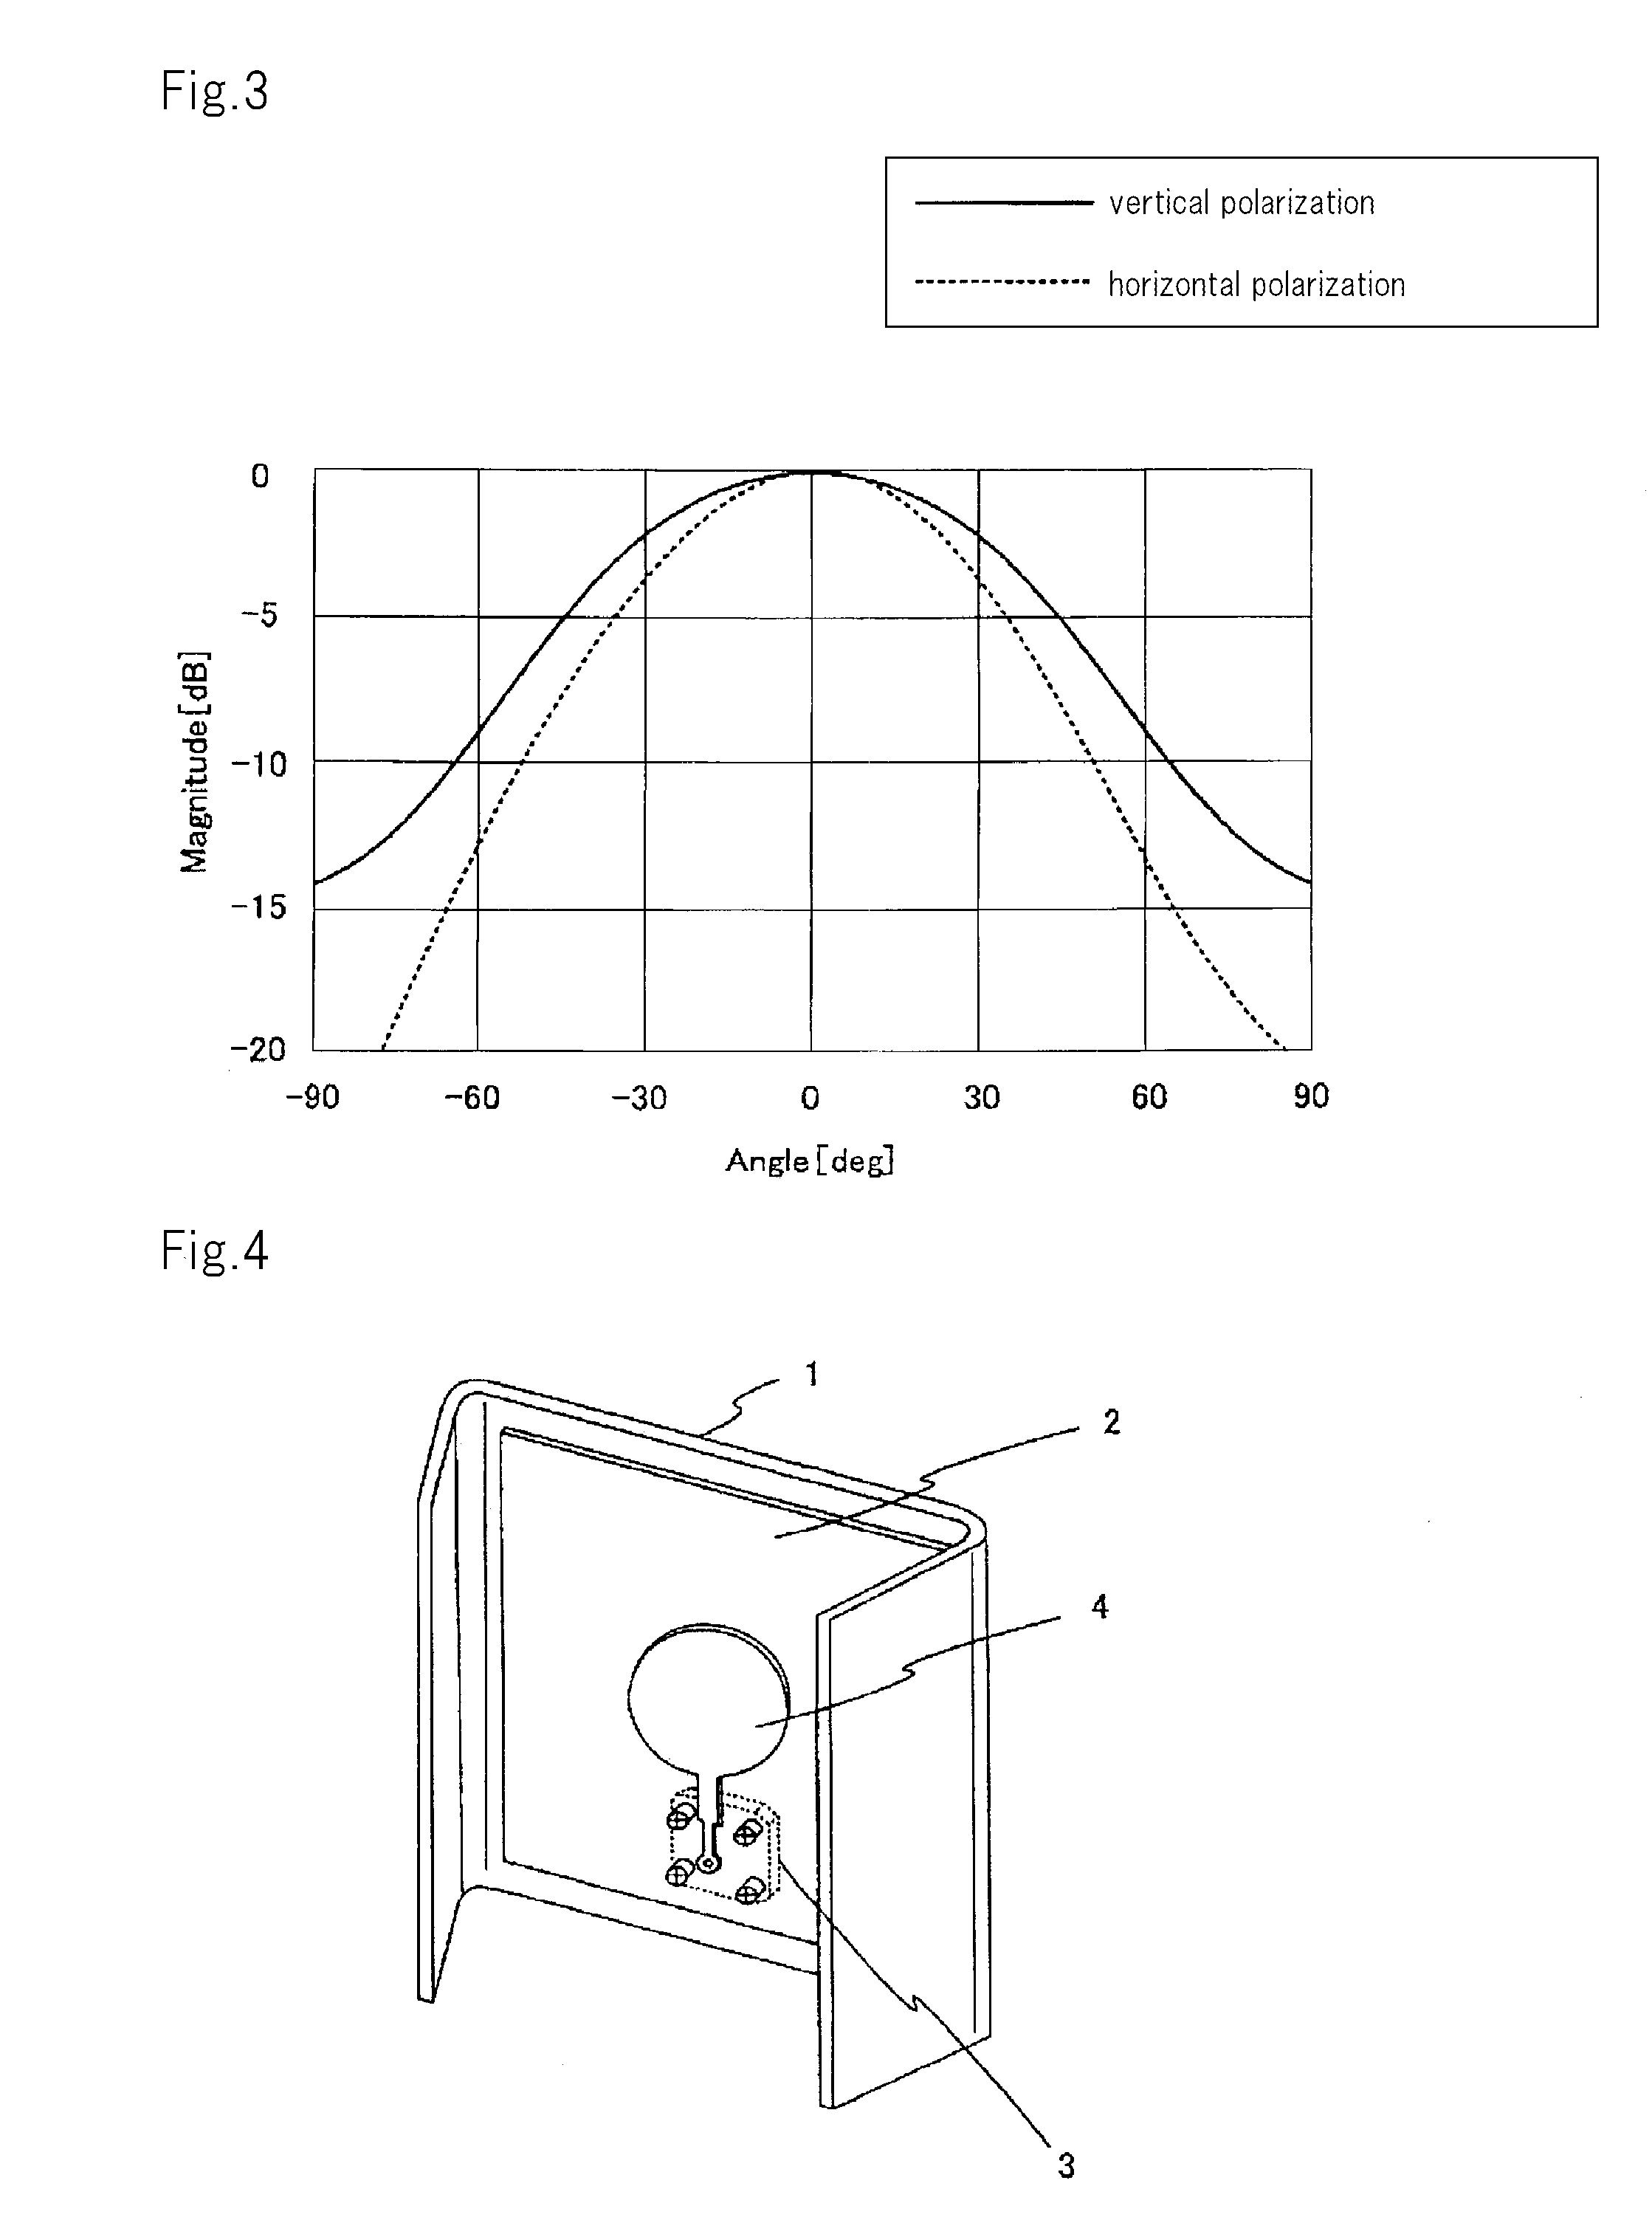 Patch antenna with metal walls